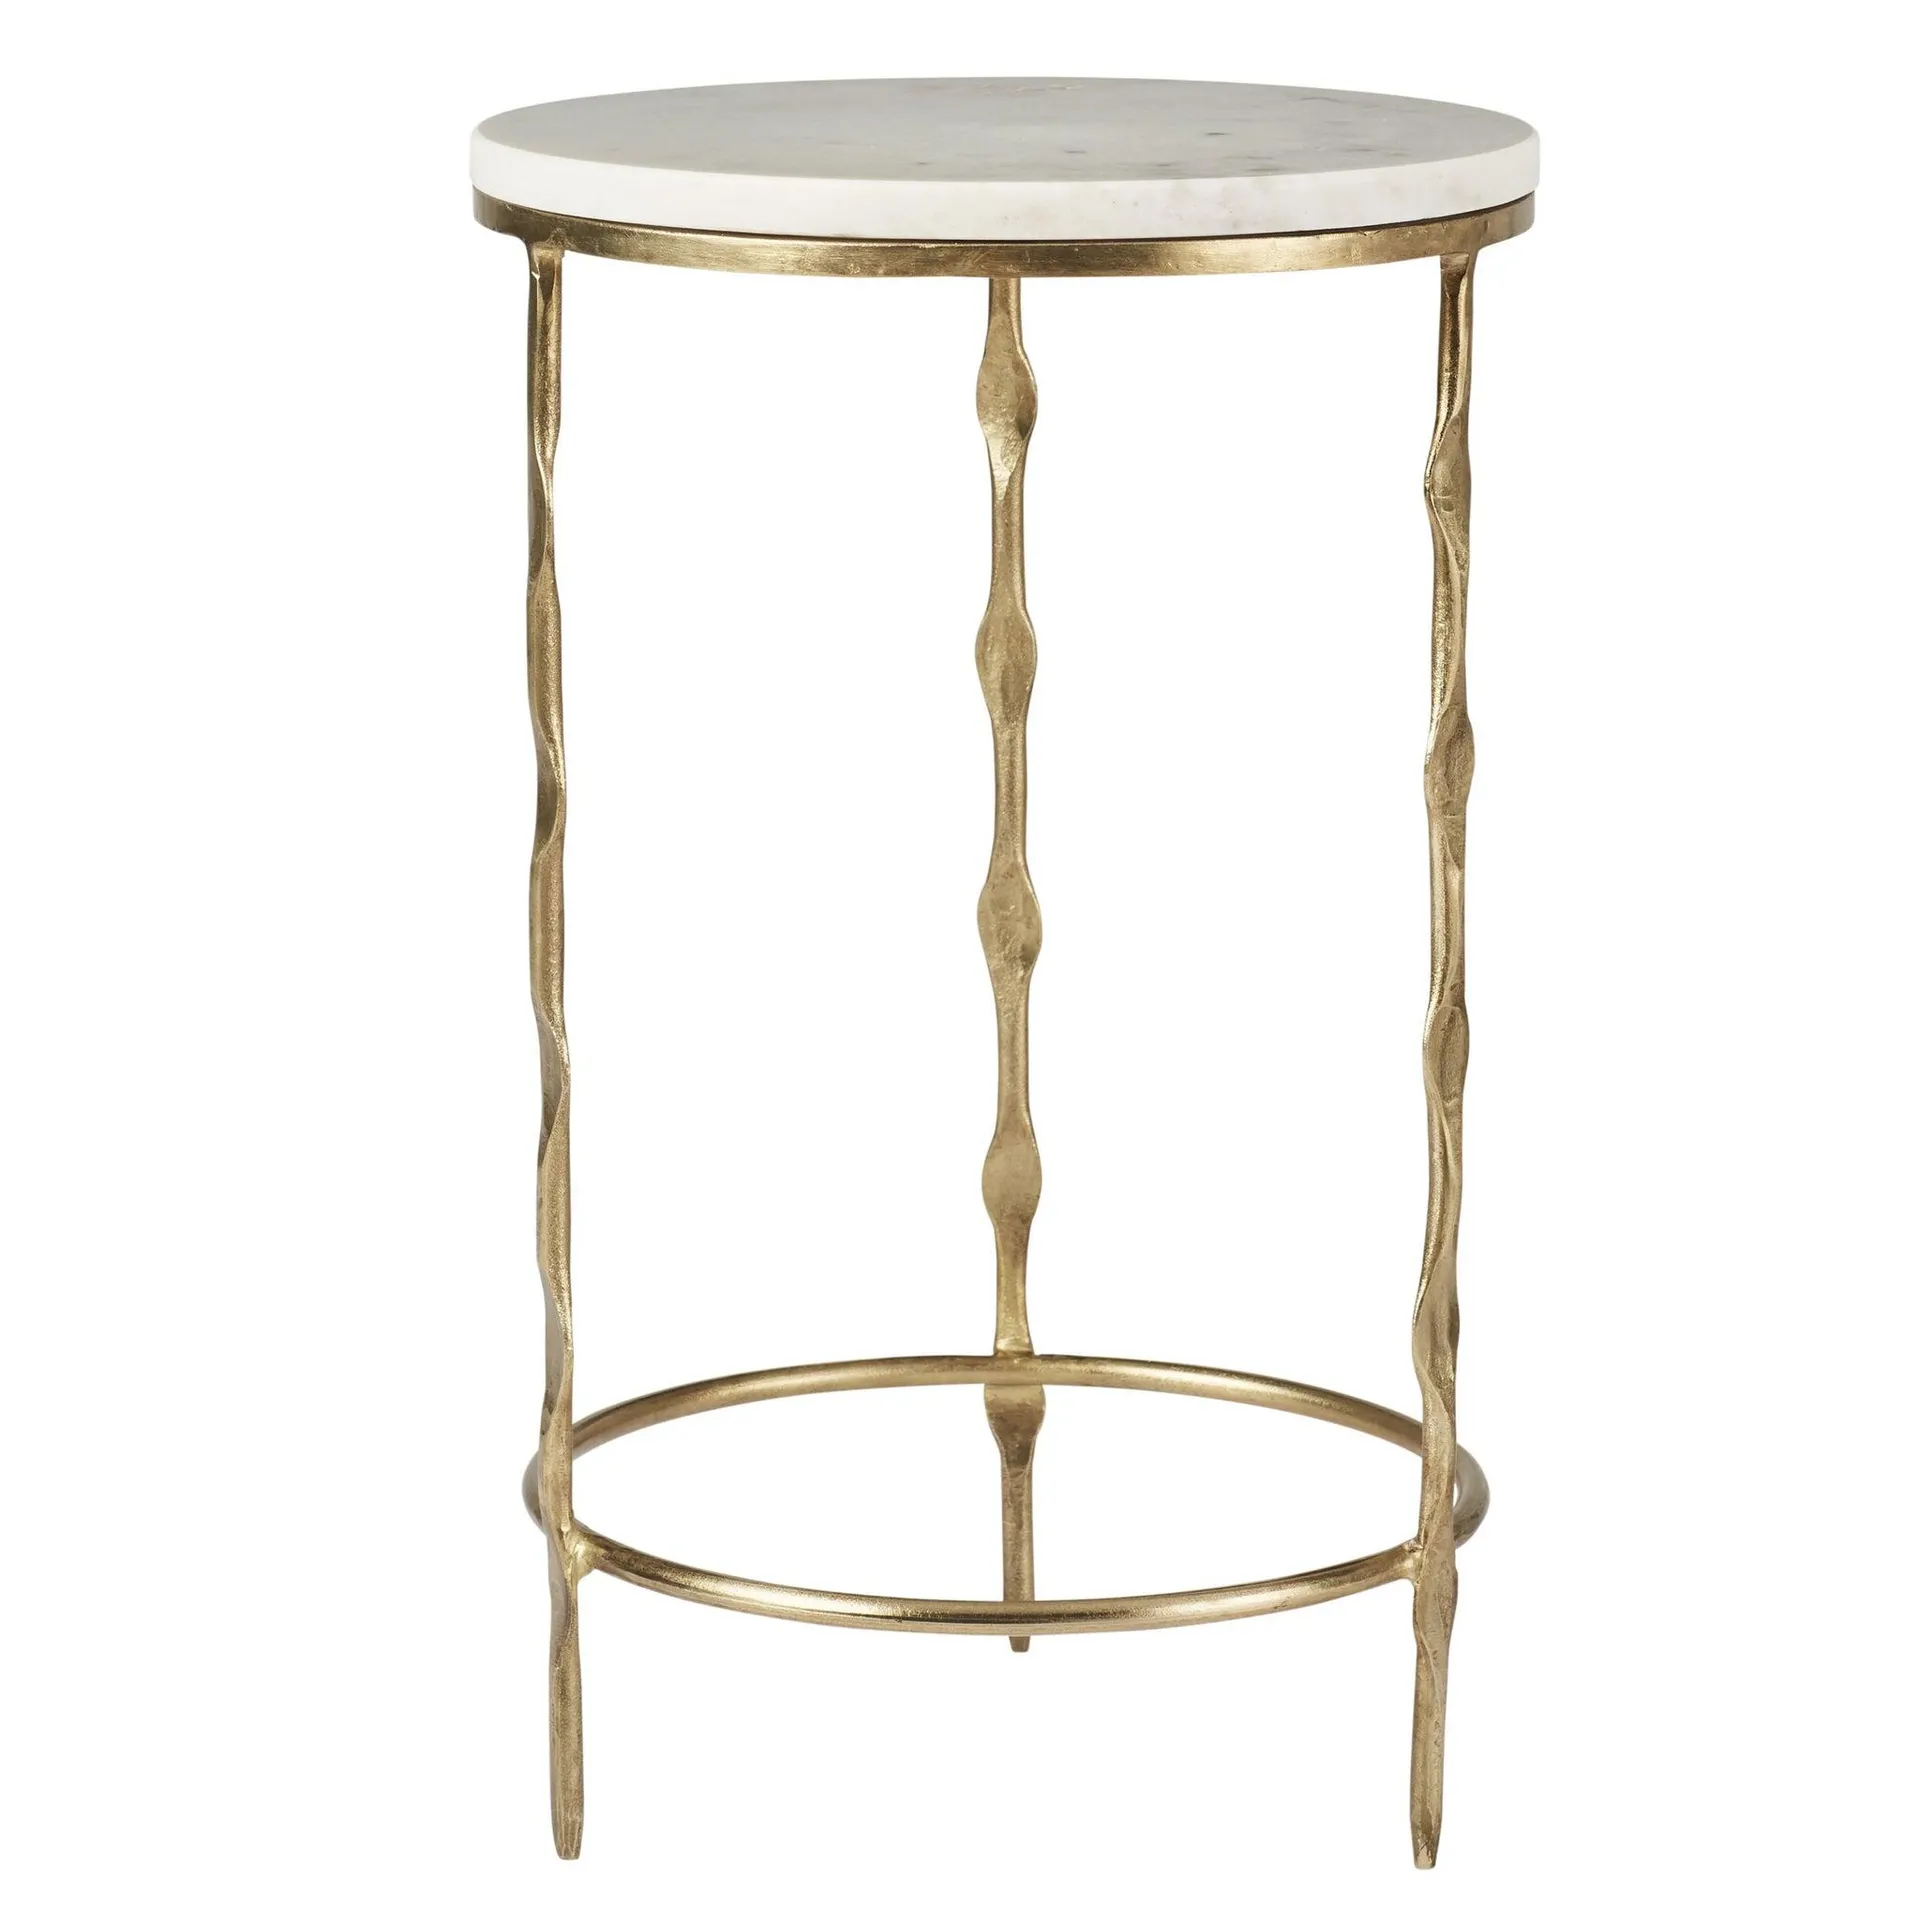 Iron Round Side Table With Marble Top 50cm